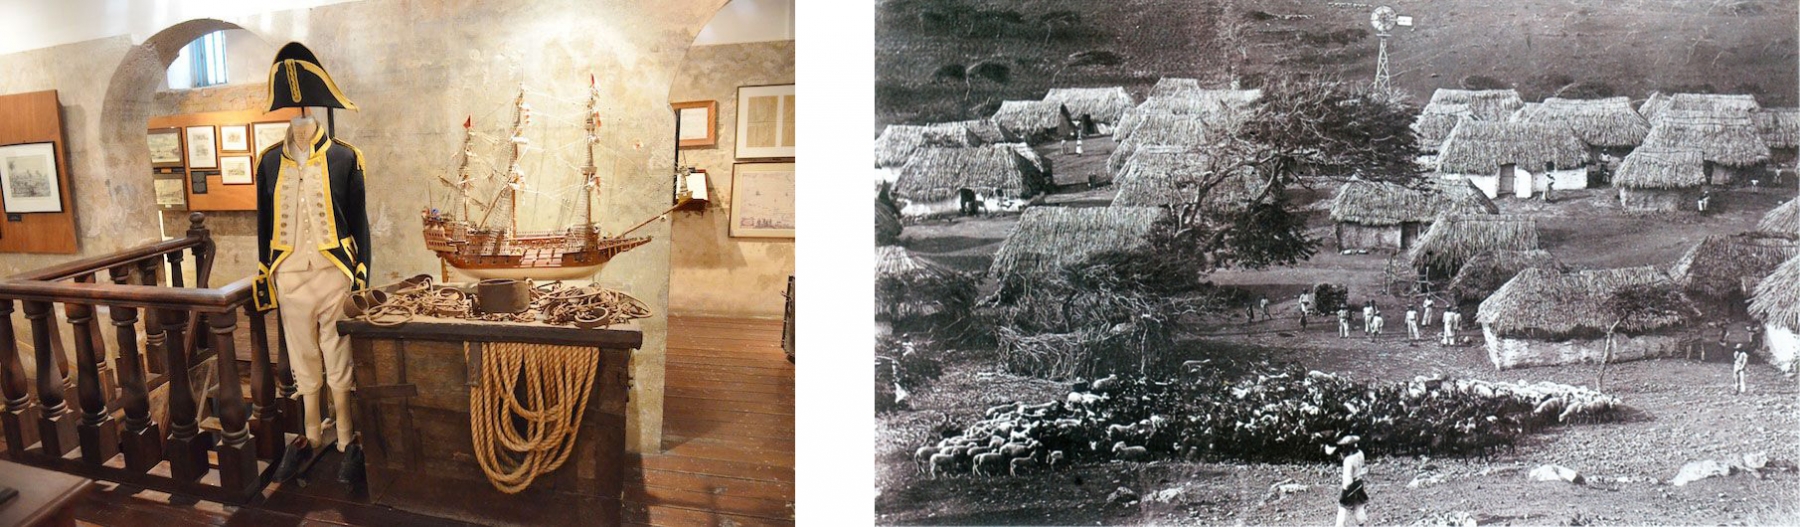 Left: photo by De Beijer, taken during his residency when he visited the Museum Kurá Hulanda, Curaçao.  Right: from the artist's research archive — a former plantation of Siberio Cafiero, Curaçao (1900-1904).